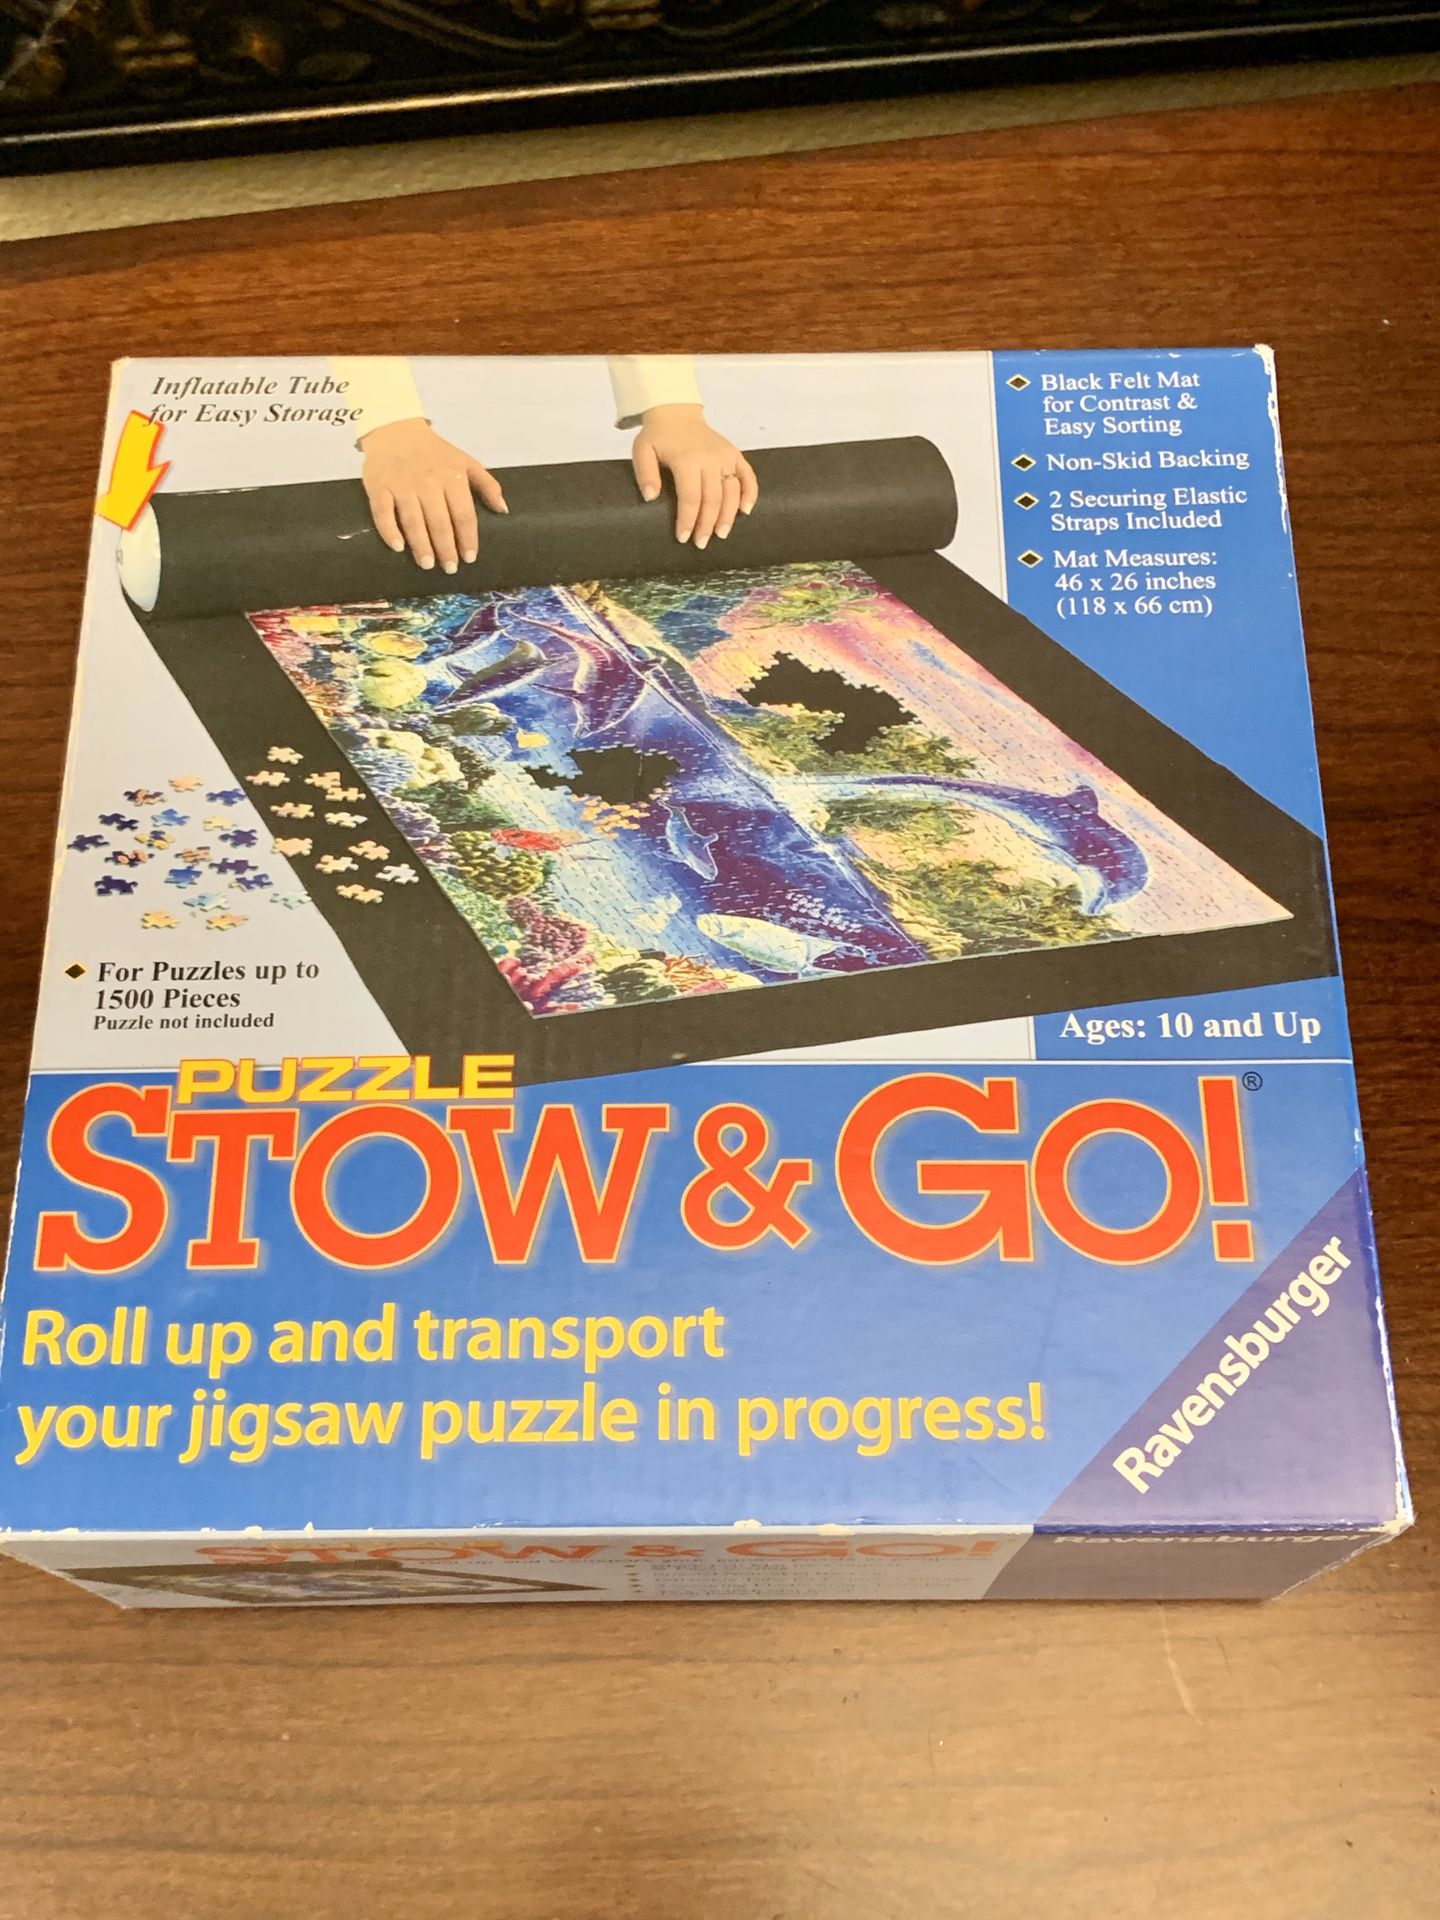 Puzzle Stow & Go by Ravensburger